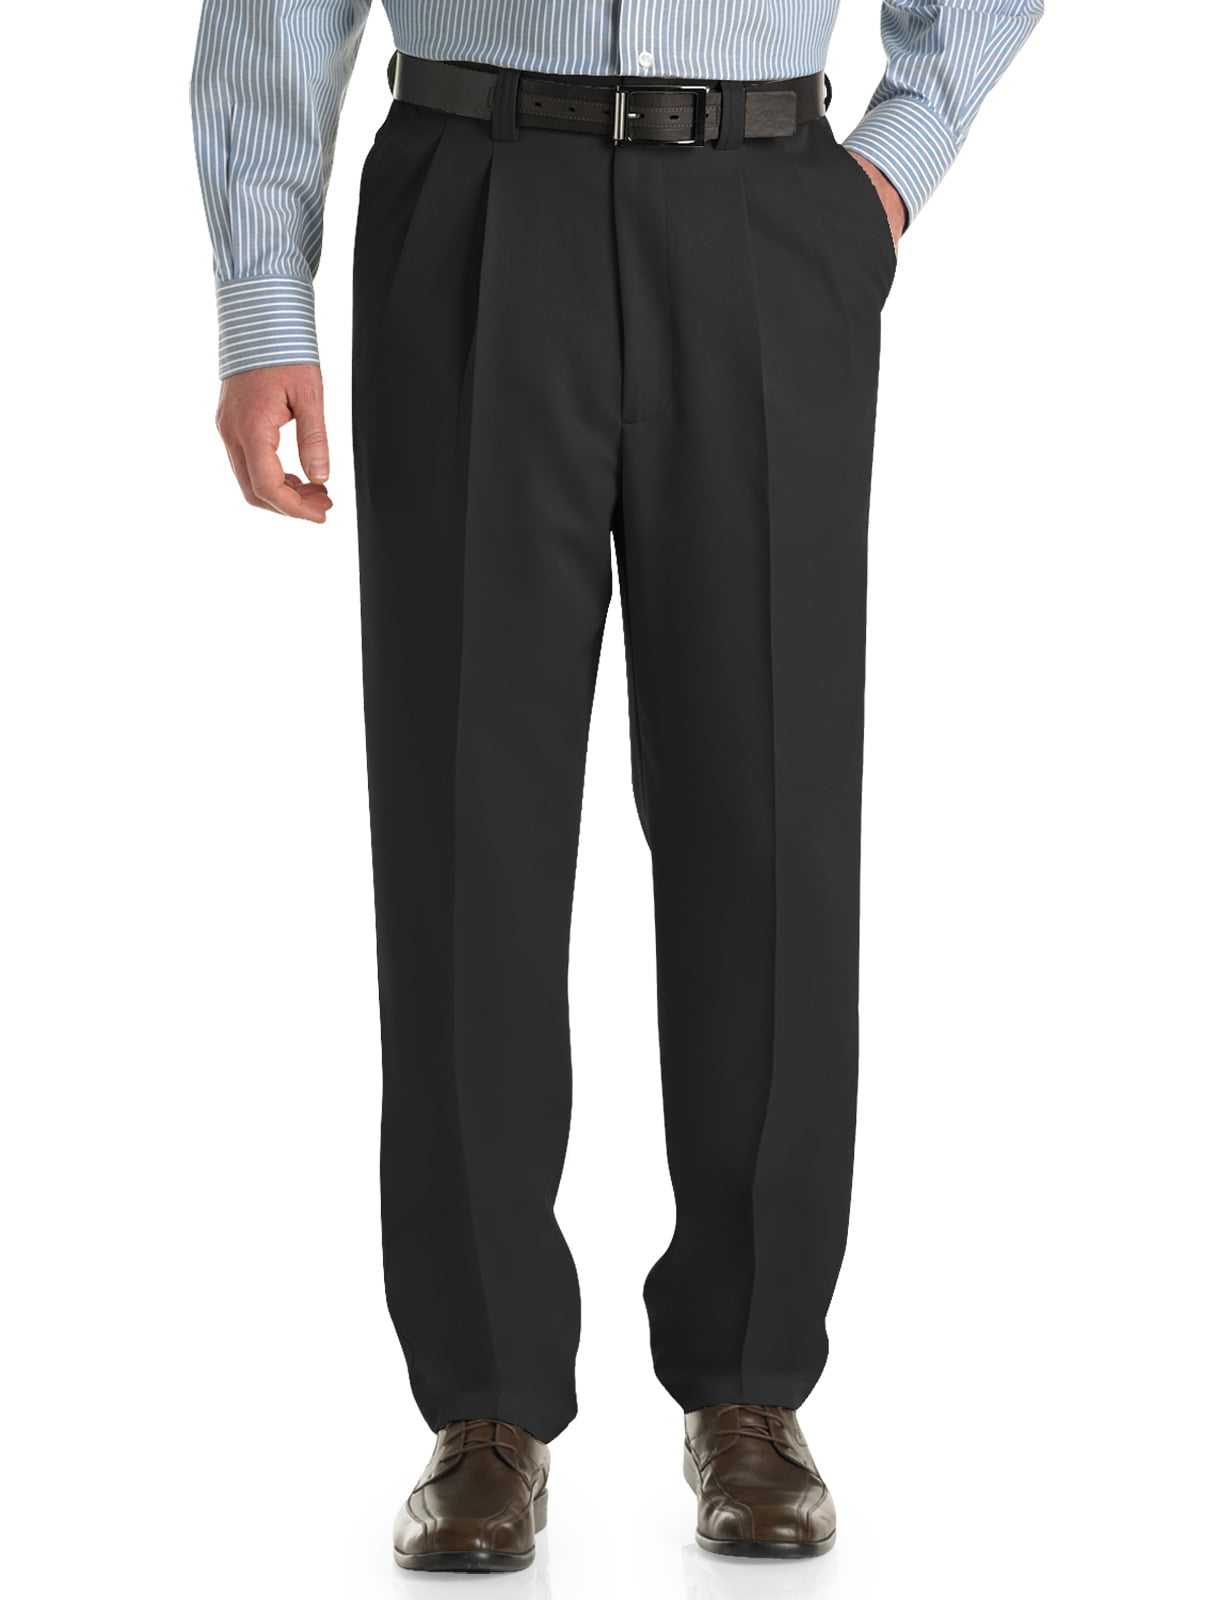 Oak Hill by DXL Men's Big and Tall Waist-Relaxer Pleated Microfiber ...